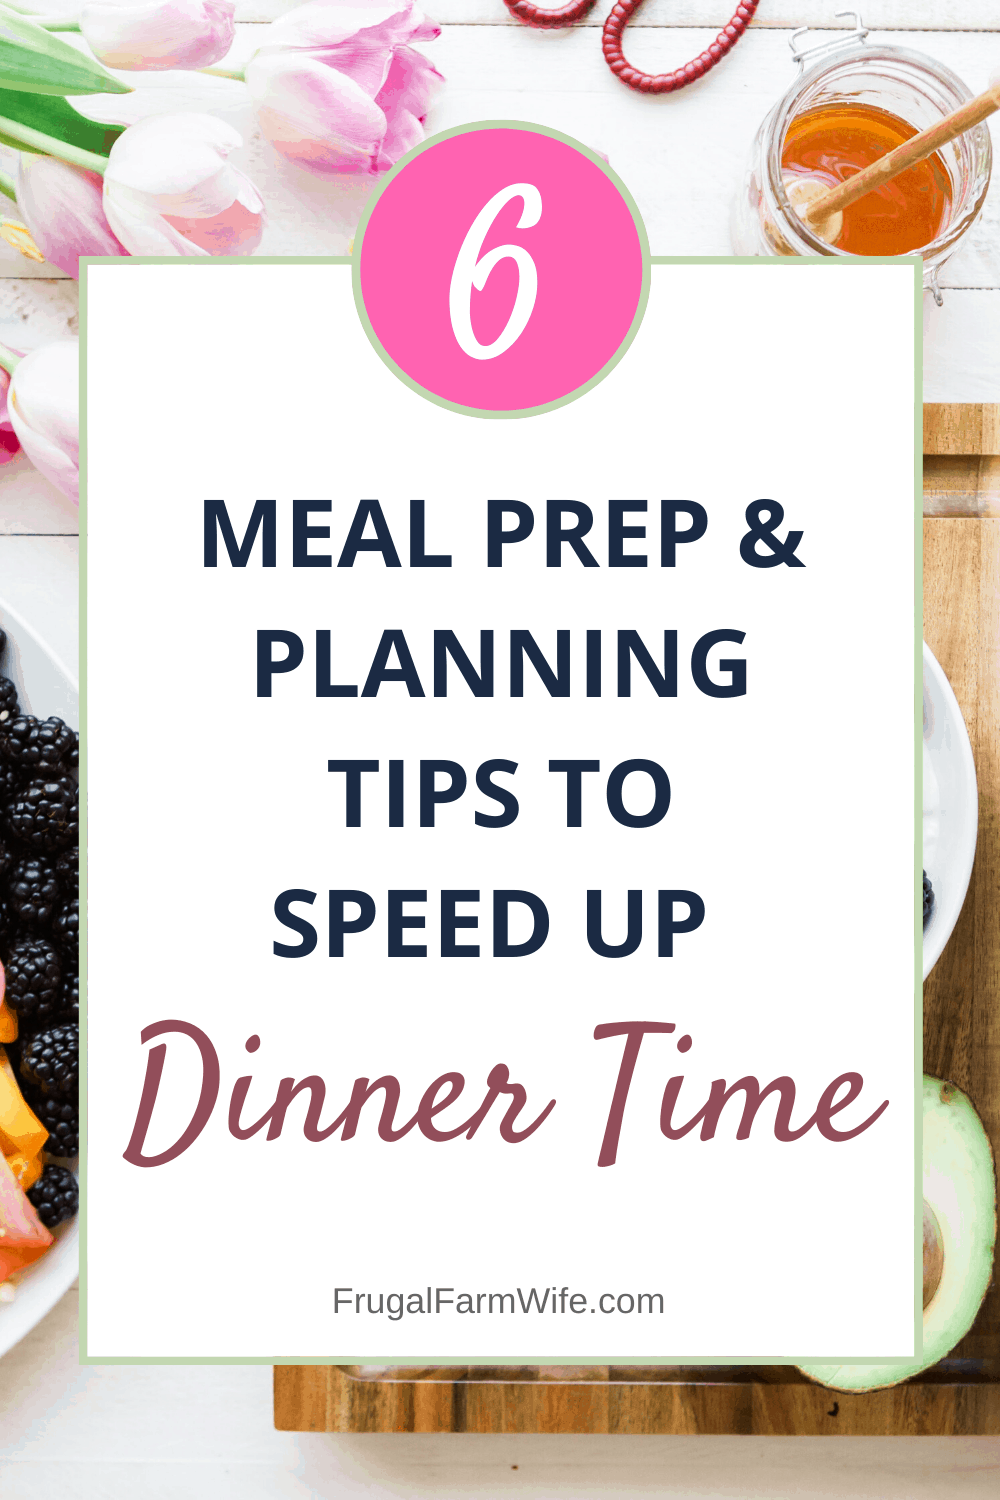 Image shows a tabletop covered in a variety of foods- fruits, vegetables, etc. A large text box covers the image with text that reads "6 Meal Prep and Planning TIps to Speed Up Dinner Time"